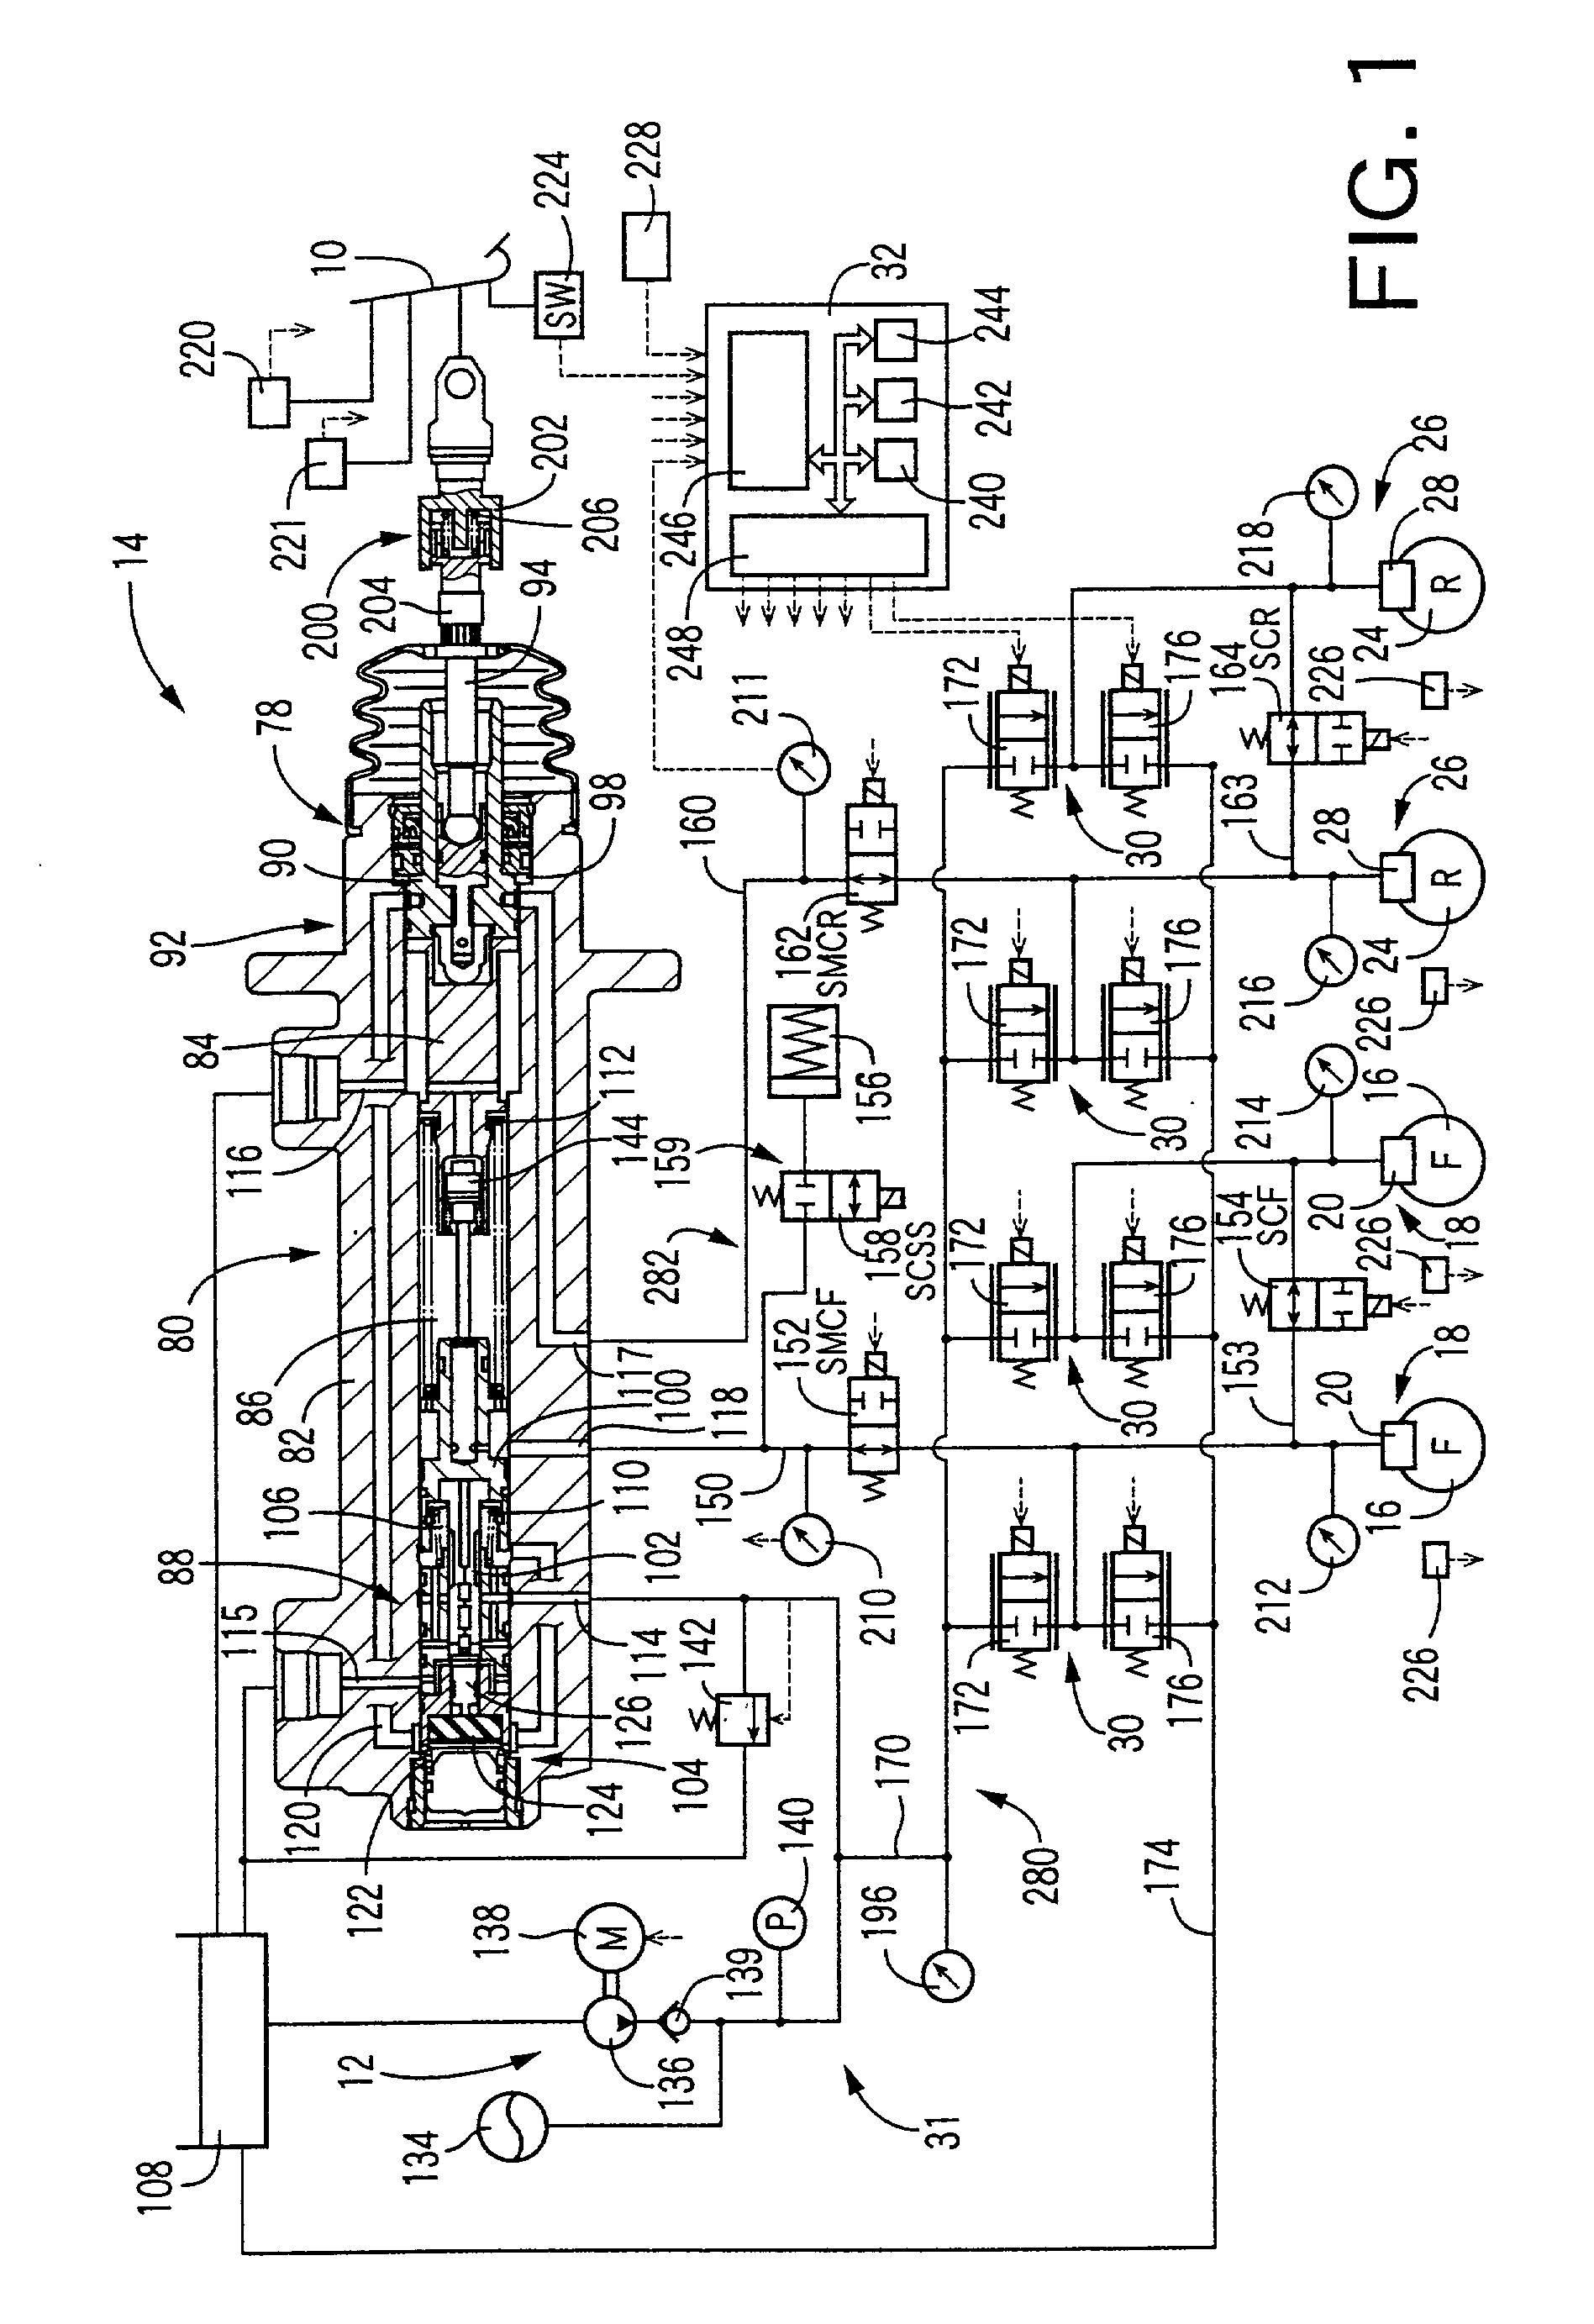 Braking pressure control apparatus capable of switching between two brake operating states using power-operated and manually operated pressure sources, respectively